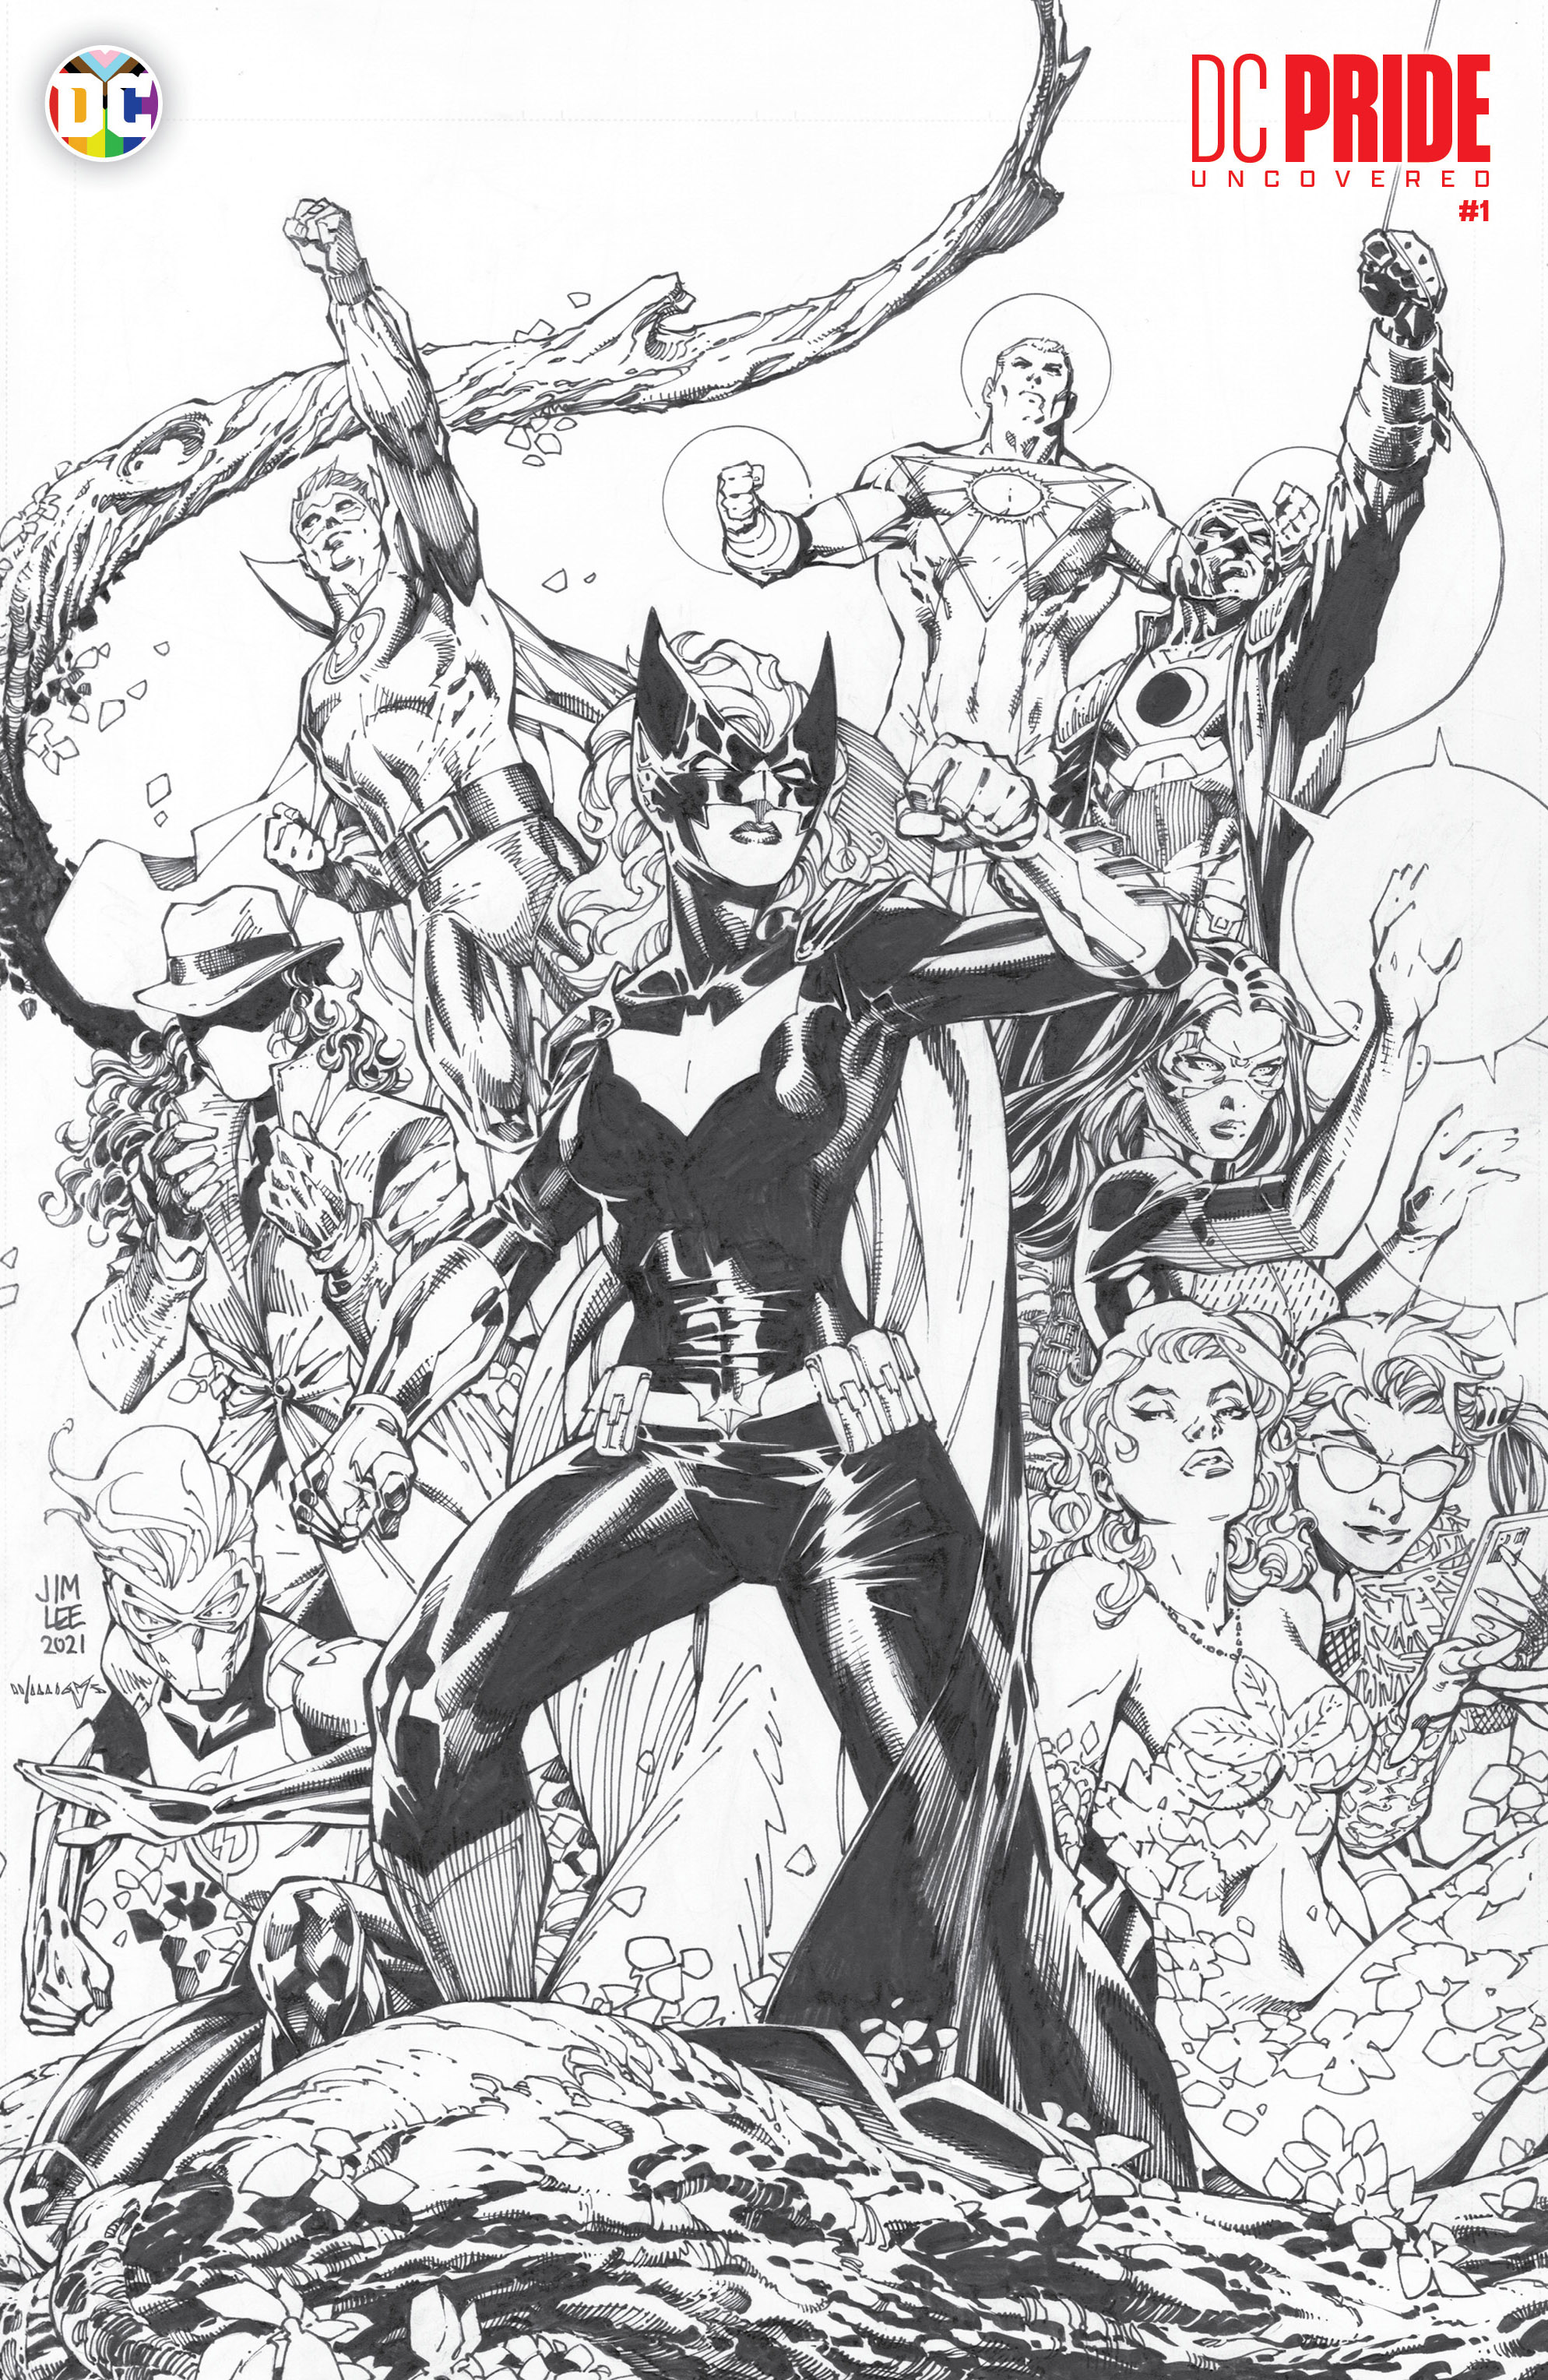 DC Pride Uncovered #1 (One Shot) Cover F 1 for 50 Incentive Jim Lee & Scott Williams Black & White Variant